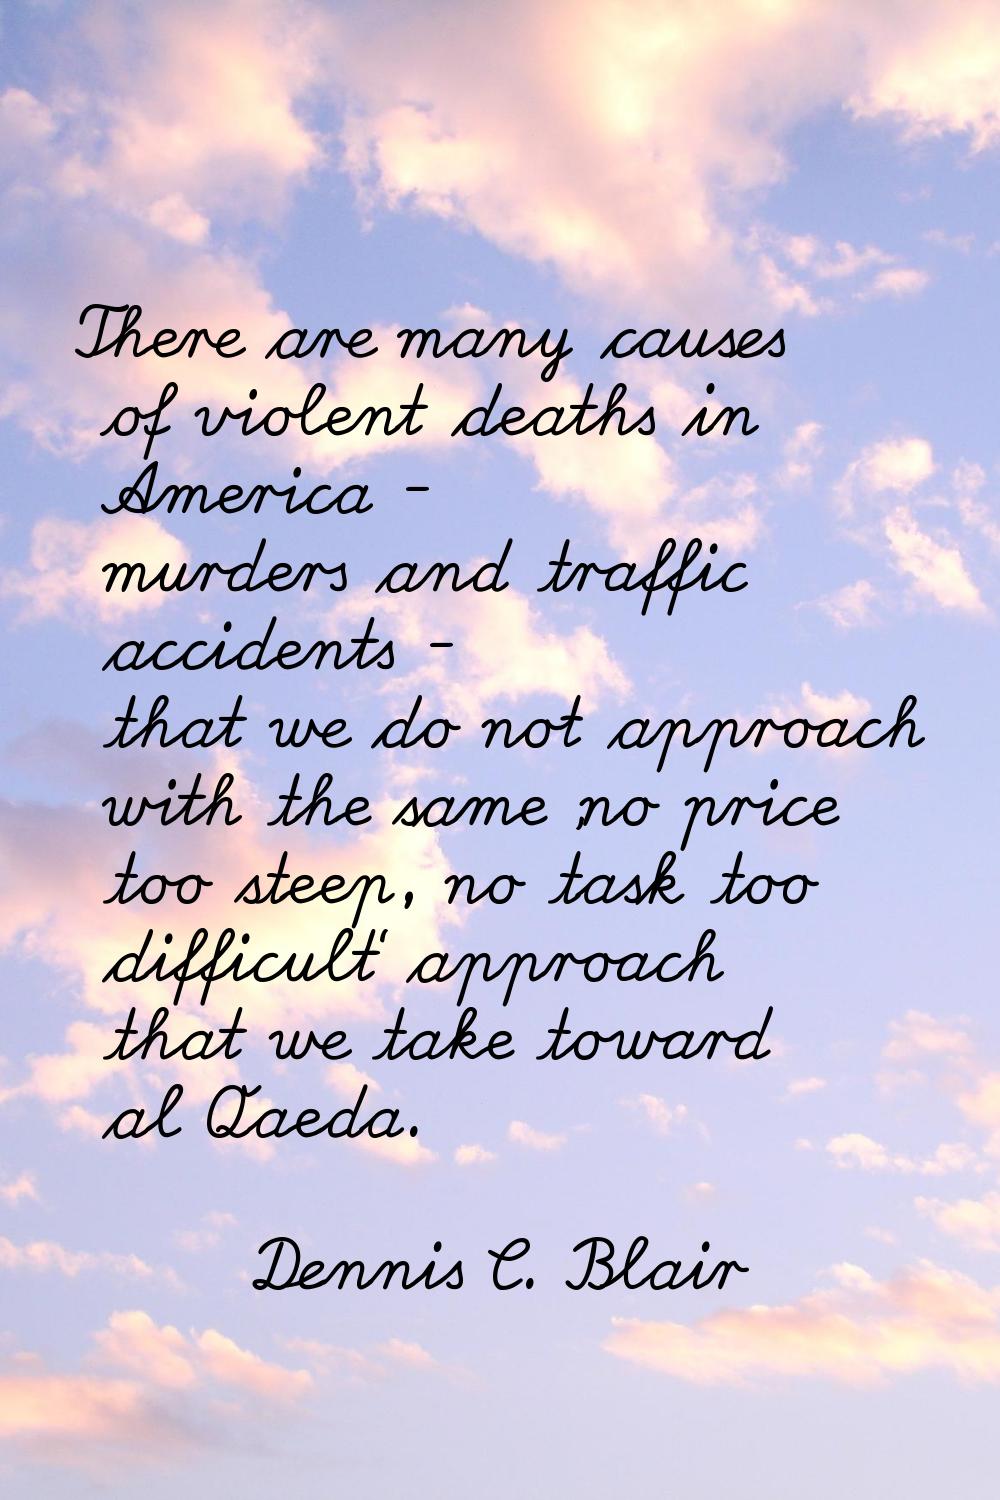 There are many causes of violent deaths in America - murders and traffic accidents - that we do not